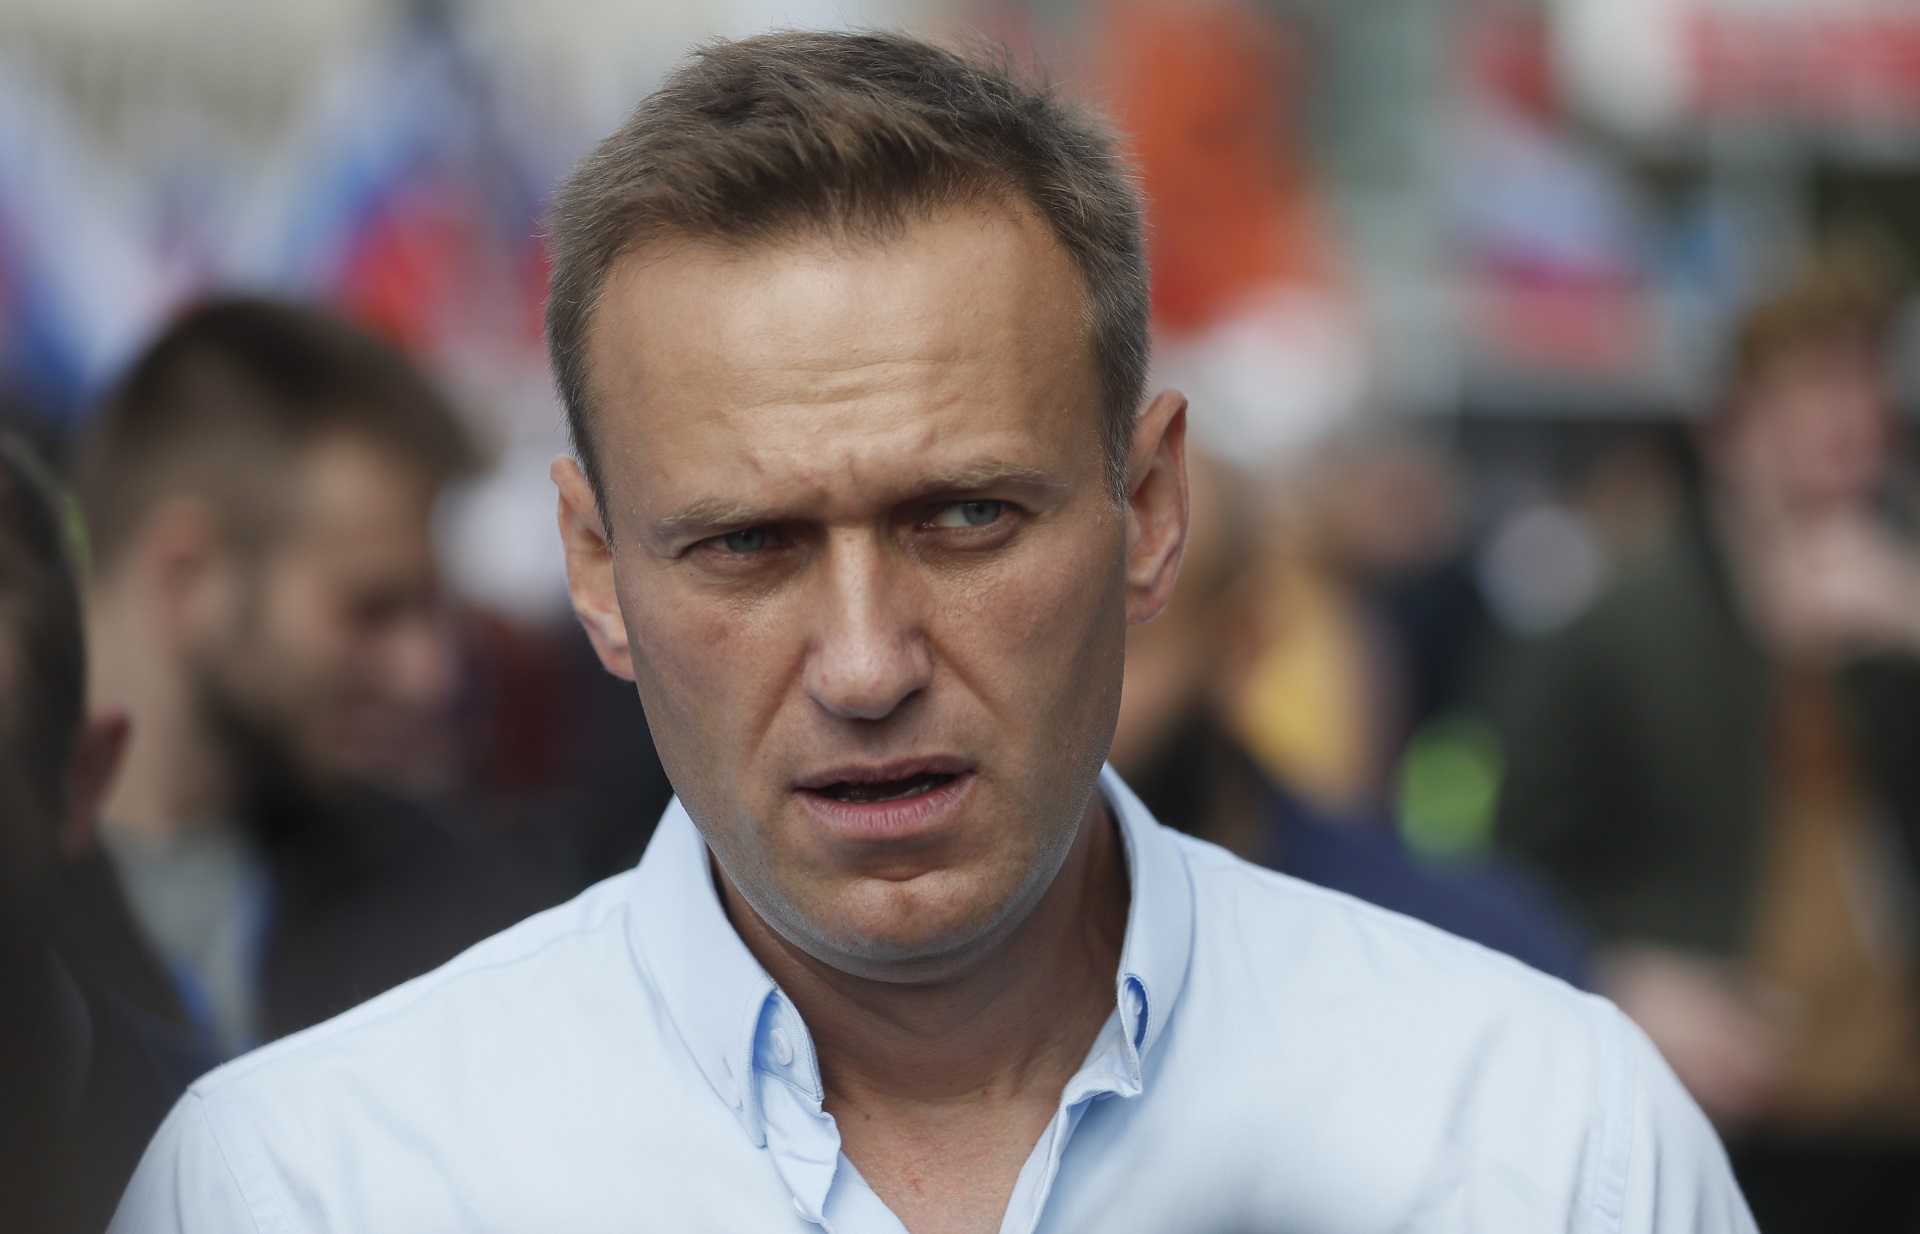 epa08616676 (FILE) - Russian Opposition activist Alexei Navalny attends a rally in support of opposition candidates in the Moscow City Duma elections in downtown of Moscow, Russia, 20 July 2019 (reissued 21 August 2020).  A German human rights group was to bring Russian opposition leader Alexei Navalny from Omsk, Russia, to a German hospital for treatment after a suspected poisoning left him comatose.  EPA/SERGEI ILNITSKY *** Local Caption *** 55367308